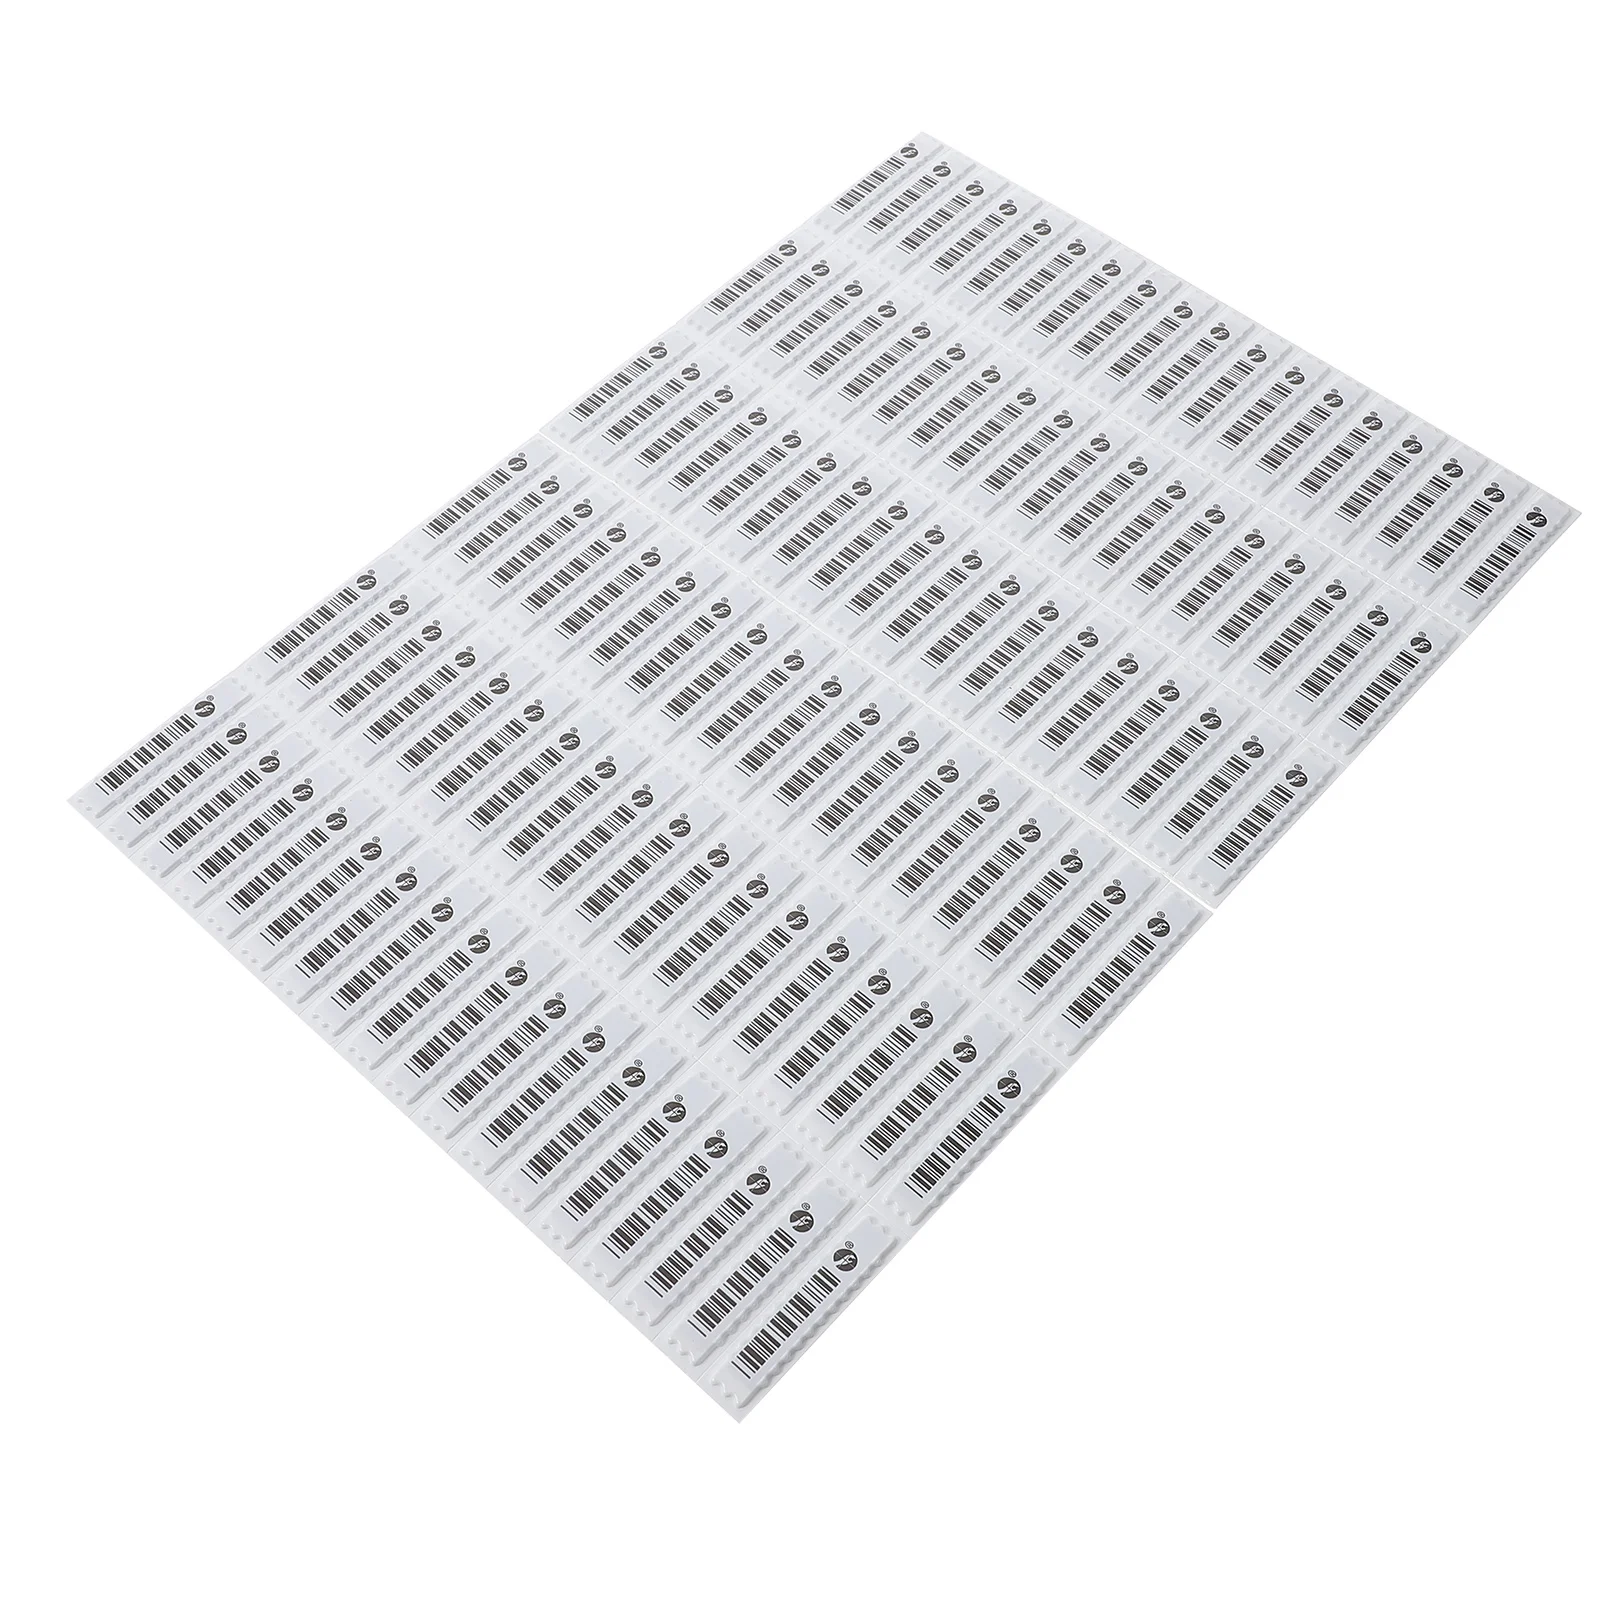 

108 Pcs Copyright Label Commodity Anti-theft Tag Labels Acoustomagnetic Goods Abs Supermarket Cosmetics